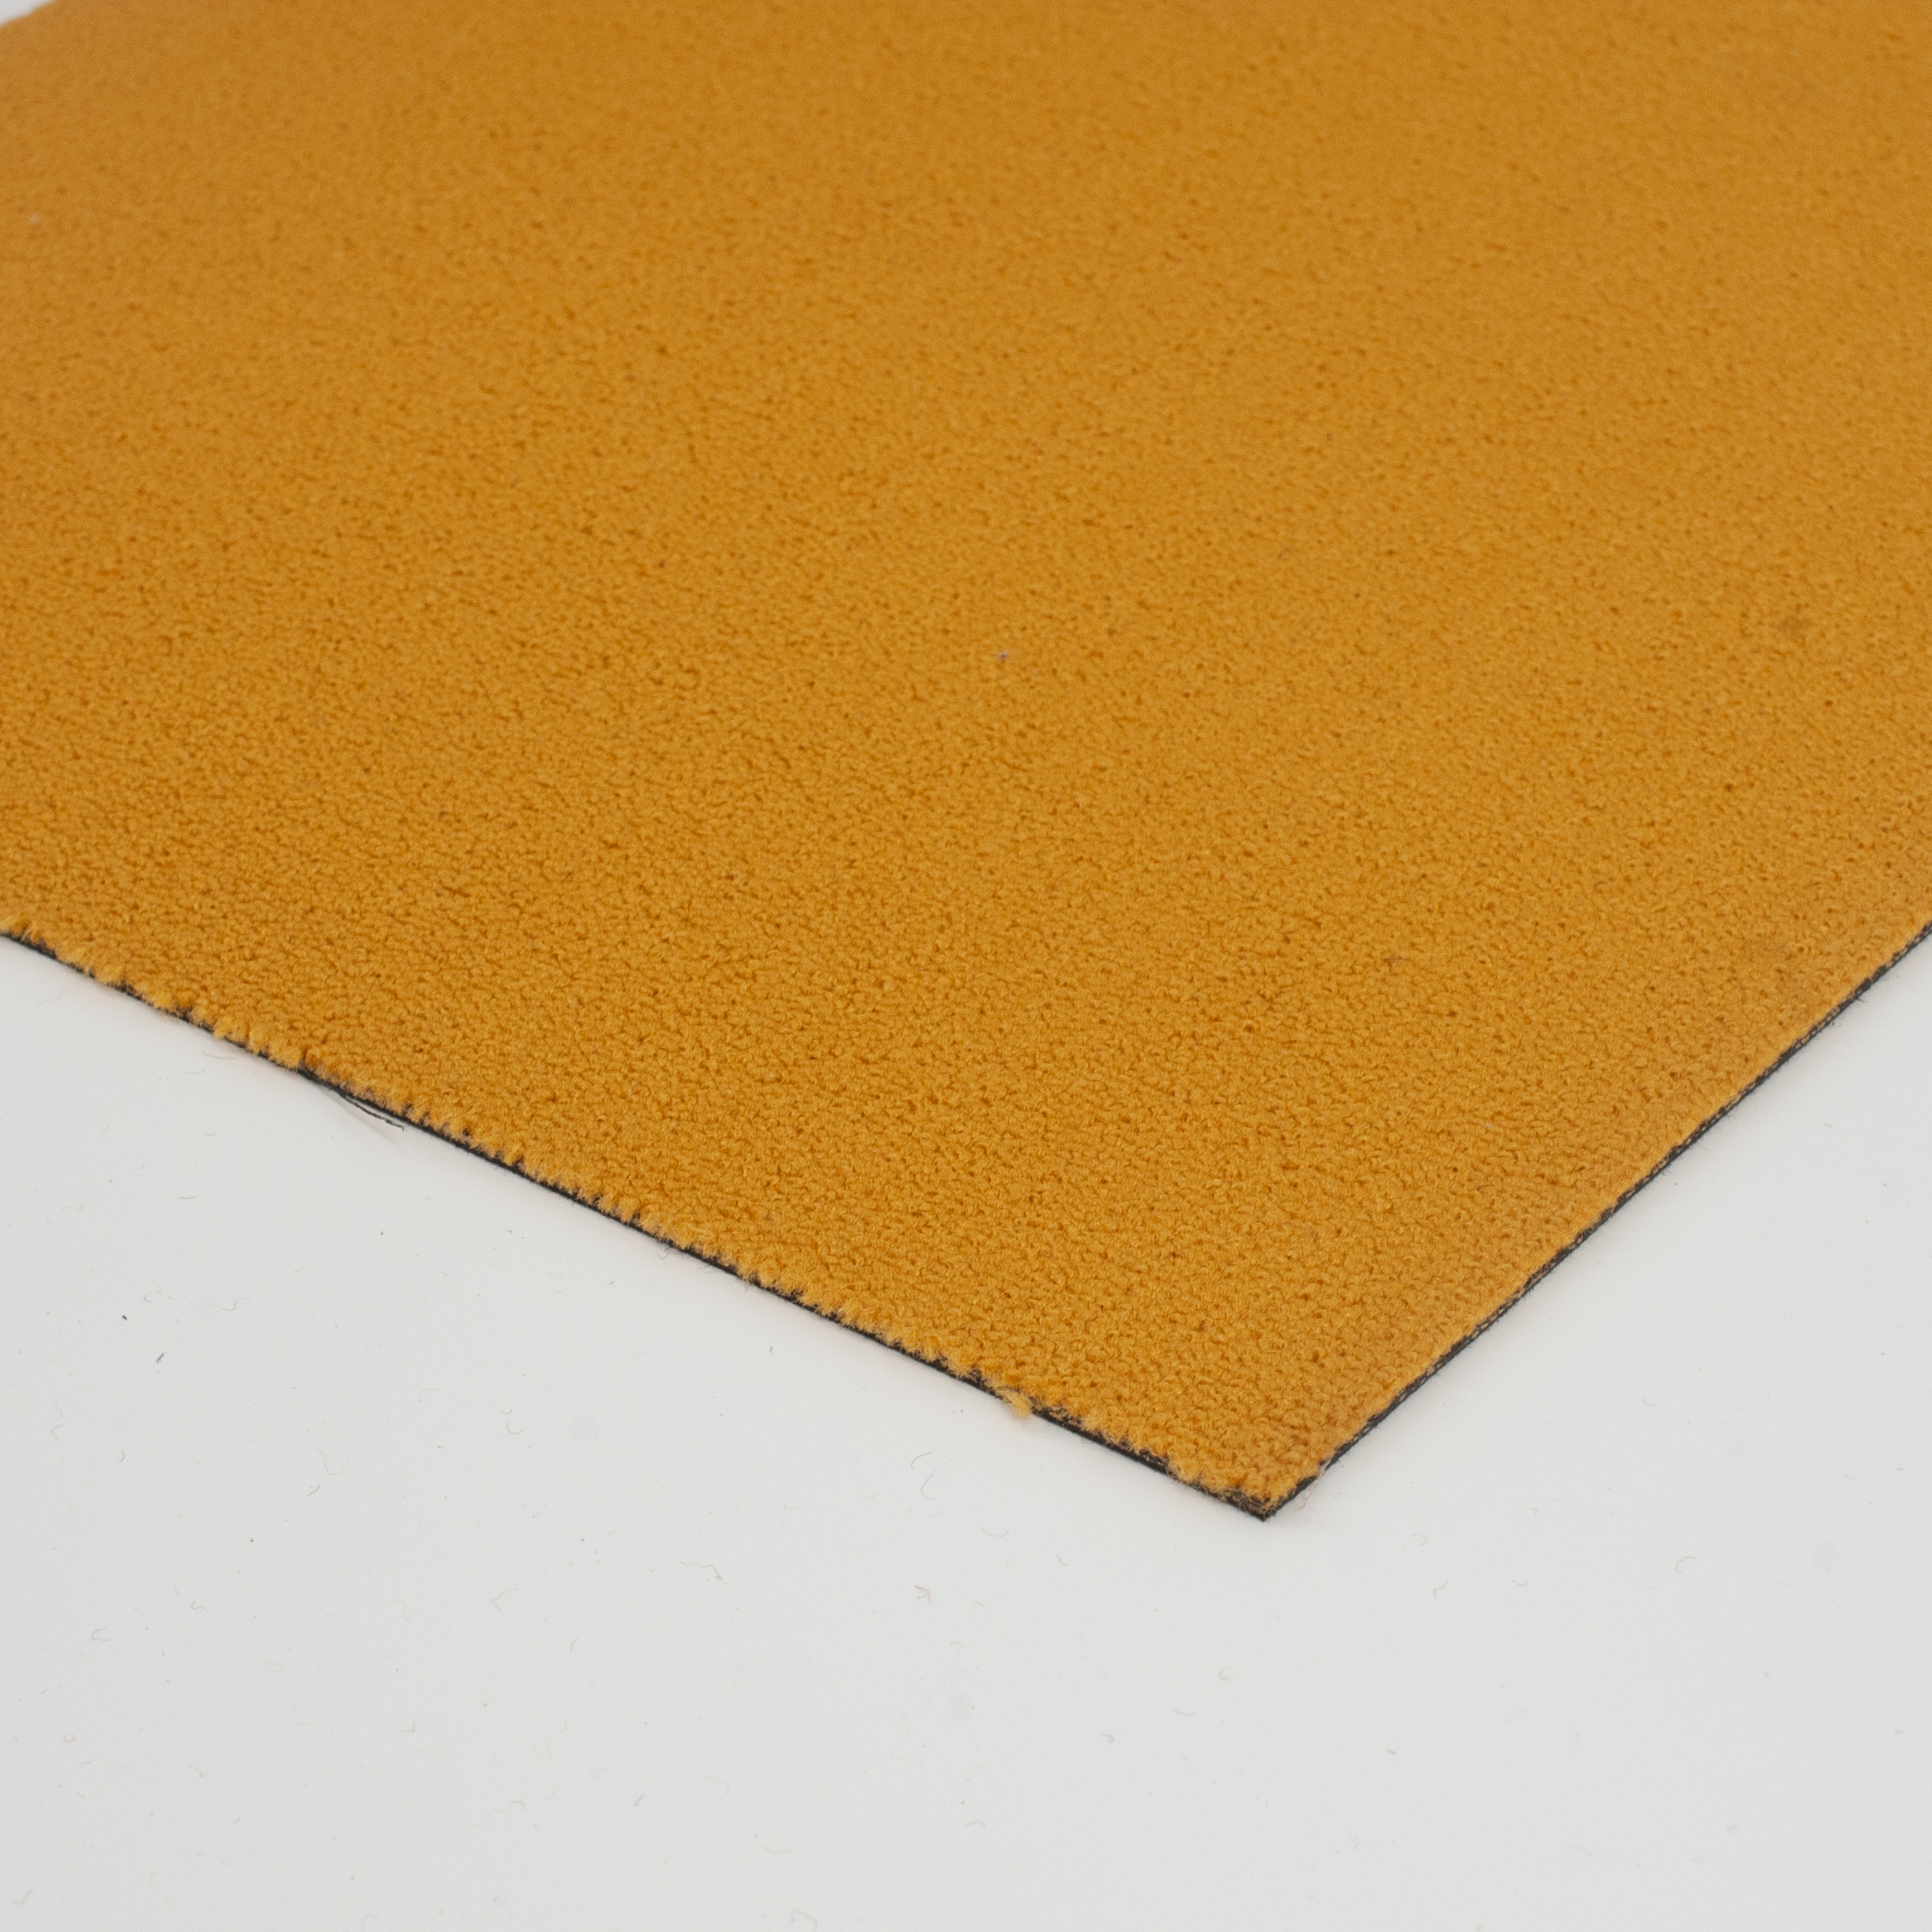 Recyclable Soft Carpet Tiles For Home